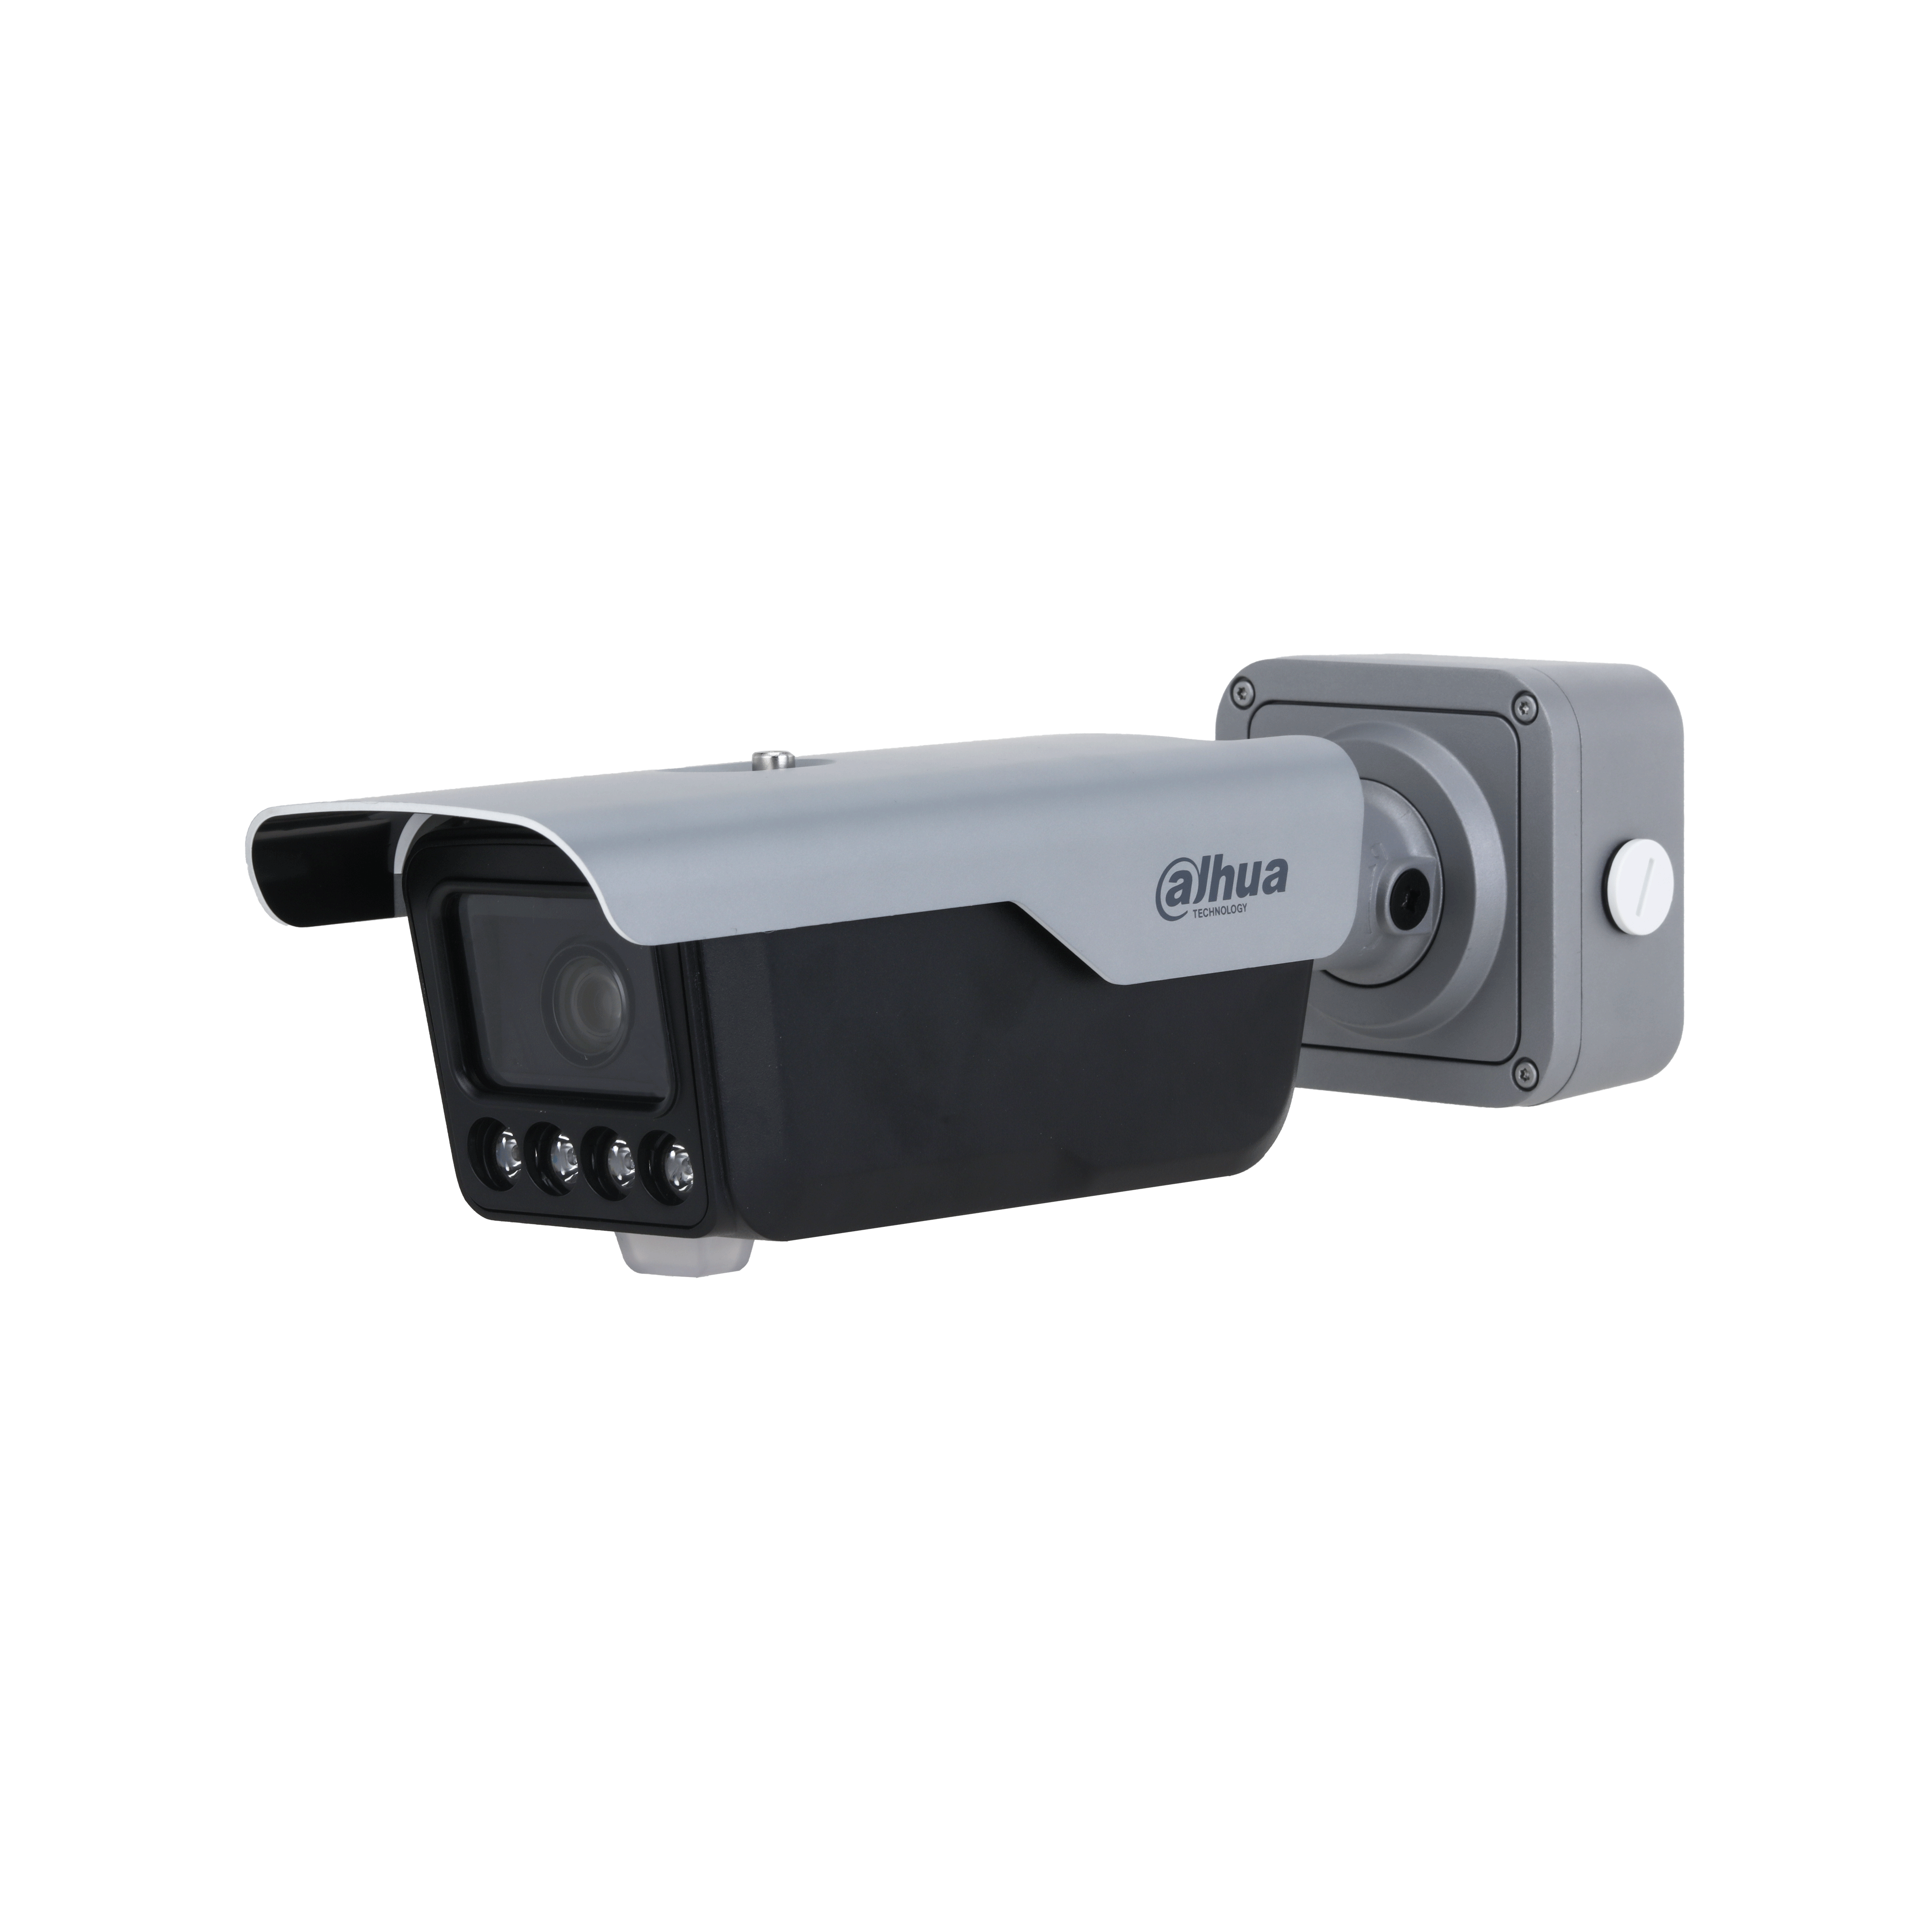 TRAFFIC SERIES IP CAMERA SILVER AI ANPR/ LPR & ACTIVE DETERRANCE DETECTION DISTANCE 8-20M 4MP H.264/5/ MJPEG BULLET 140 TRUE WDR METAL 8-32MMMOTORISED LENS 4X ZOOM WARM LED 60M POE+ IP67 BUILT IN MIC AUDIO IN AUDIO OUT 2 x ALARM IN 2 x ALARM OUT SUPPORT UP TO 256GB SD IK10 12VDC